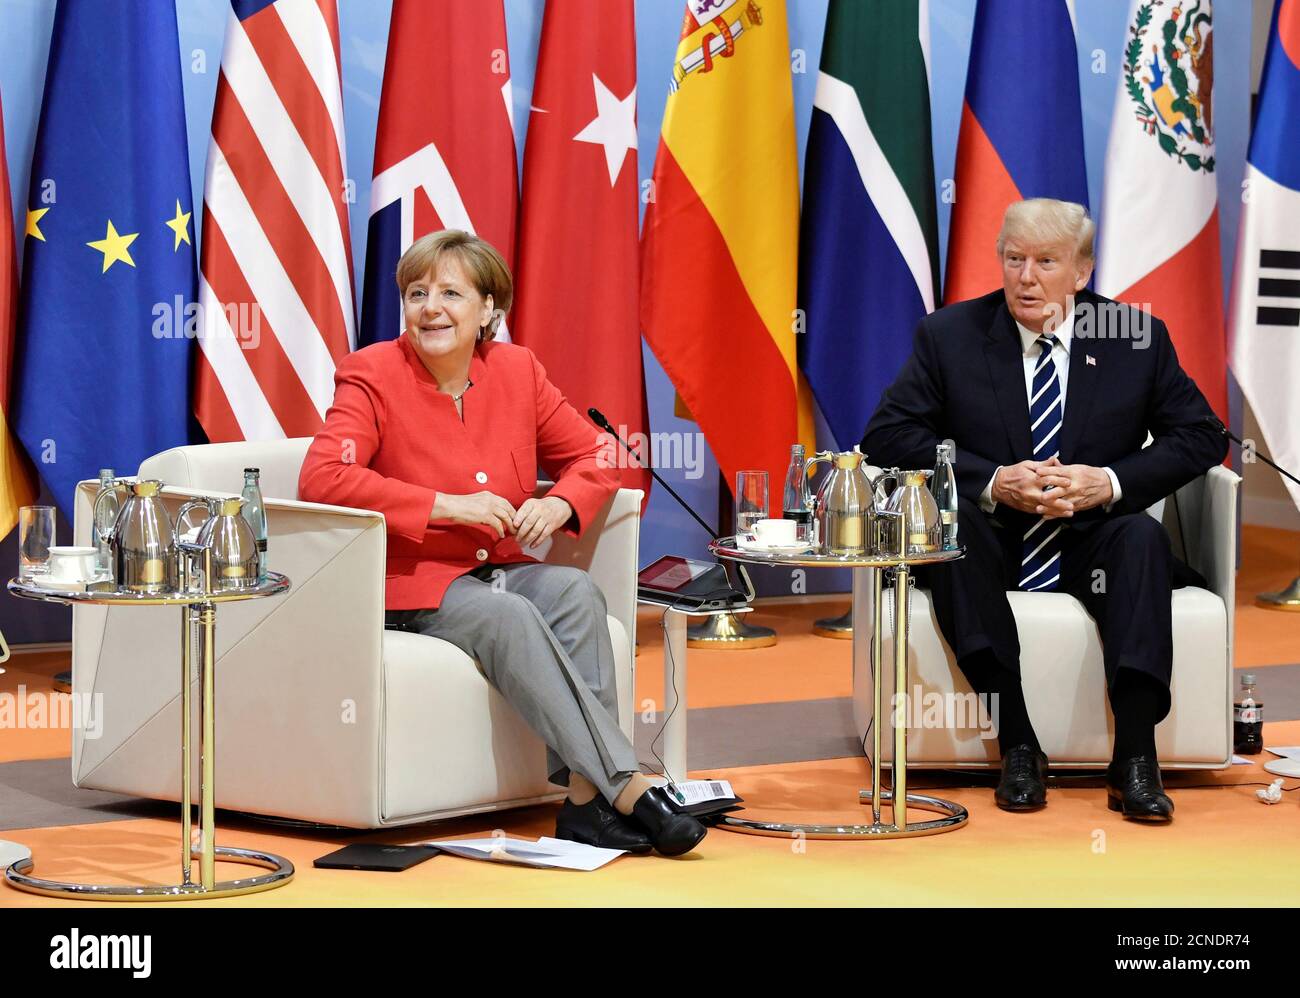 German Chancellor Angela Merkel and US President Donald Trump meet at the start of the 'retreat meeting' on the first day of the G20 summit in Hamburg, Germany, July 7, 2017. REUTERS/John MACDOUGALL,POOL Stock Photo